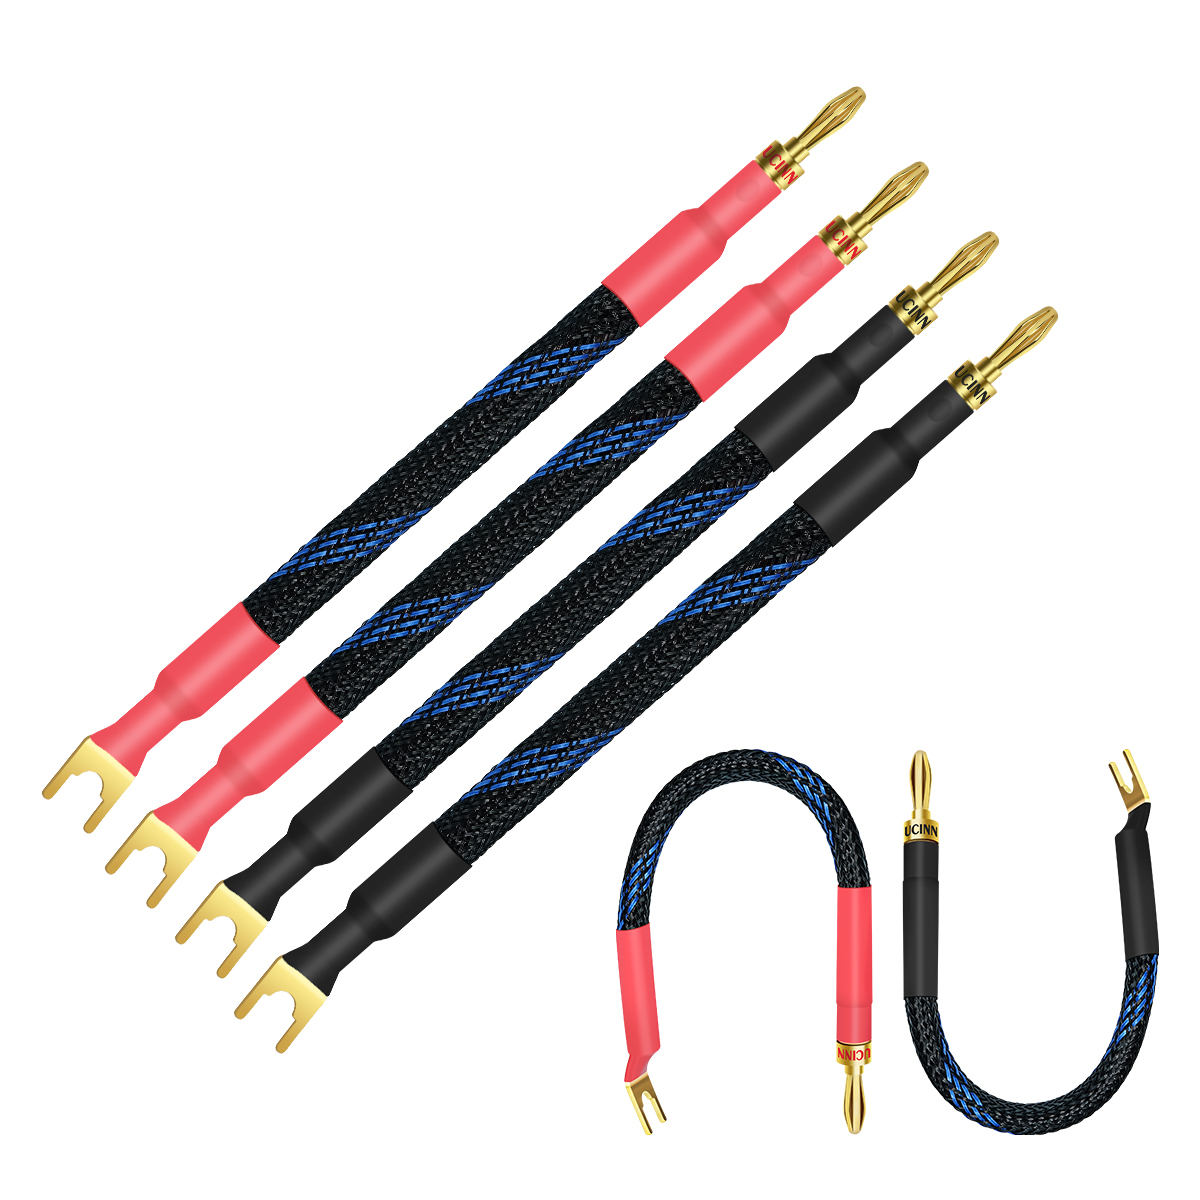 VVFLED UCINNOVATE 4 x HiFi OFC Spade to Banana Plug Speaker Wire, 13AWG 21cm Speaker jumper cable for amplifiers, Bi-Wire Jumper Bridge Spade to Banana Speaker Cable with Banana Plugs